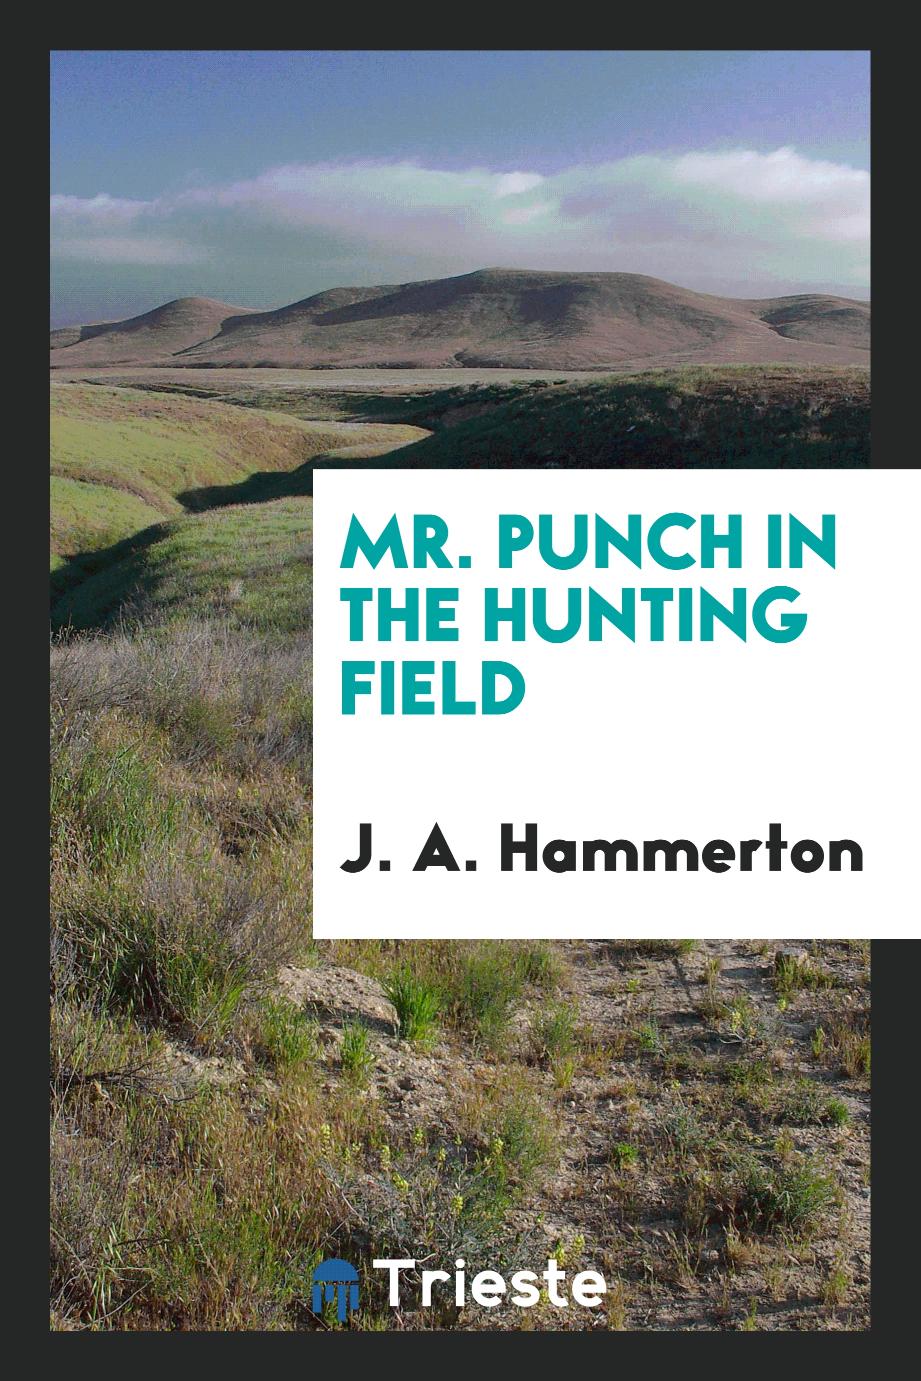 Mr. Punch in the hunting field